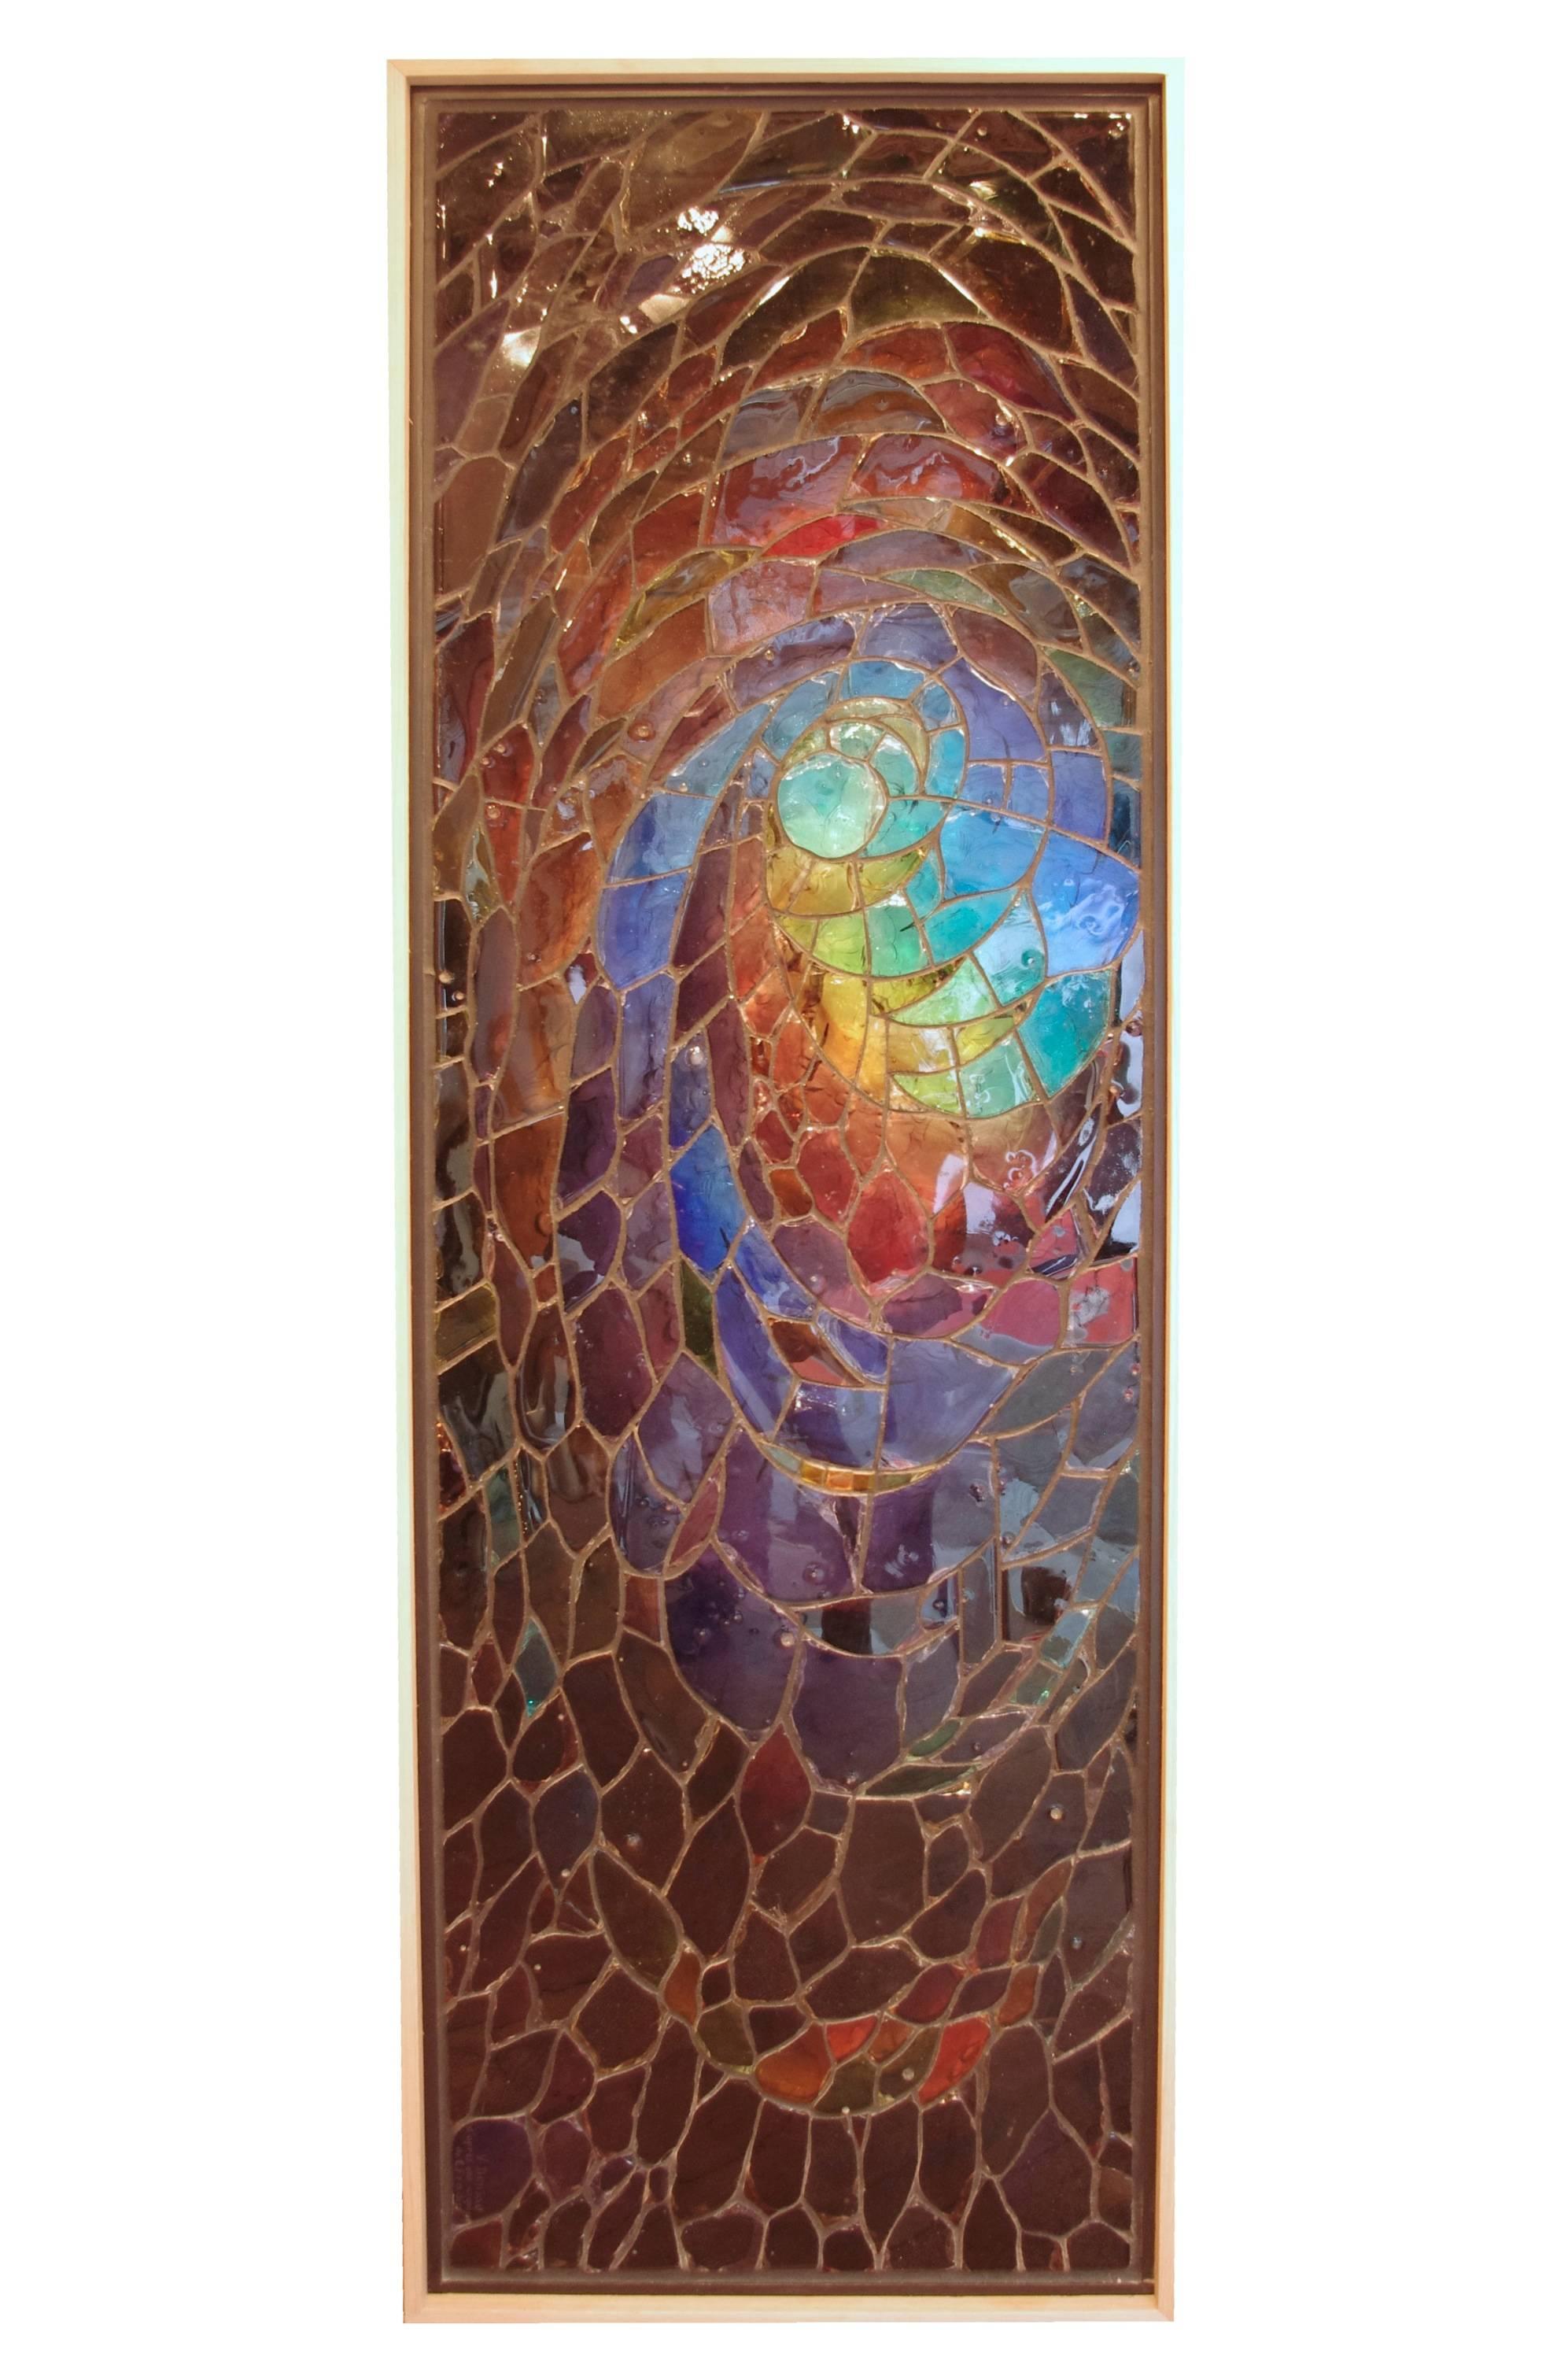 Created in 1998.
Signed V.DENIAU (Victor Deniau) and titled "d’après une esquisse de E.FRADIN". Monsieur Fradin was an artist and sponsor of this stained glass work.
Framed and backlit.
Tinted and sculpted glass slab in the mass.